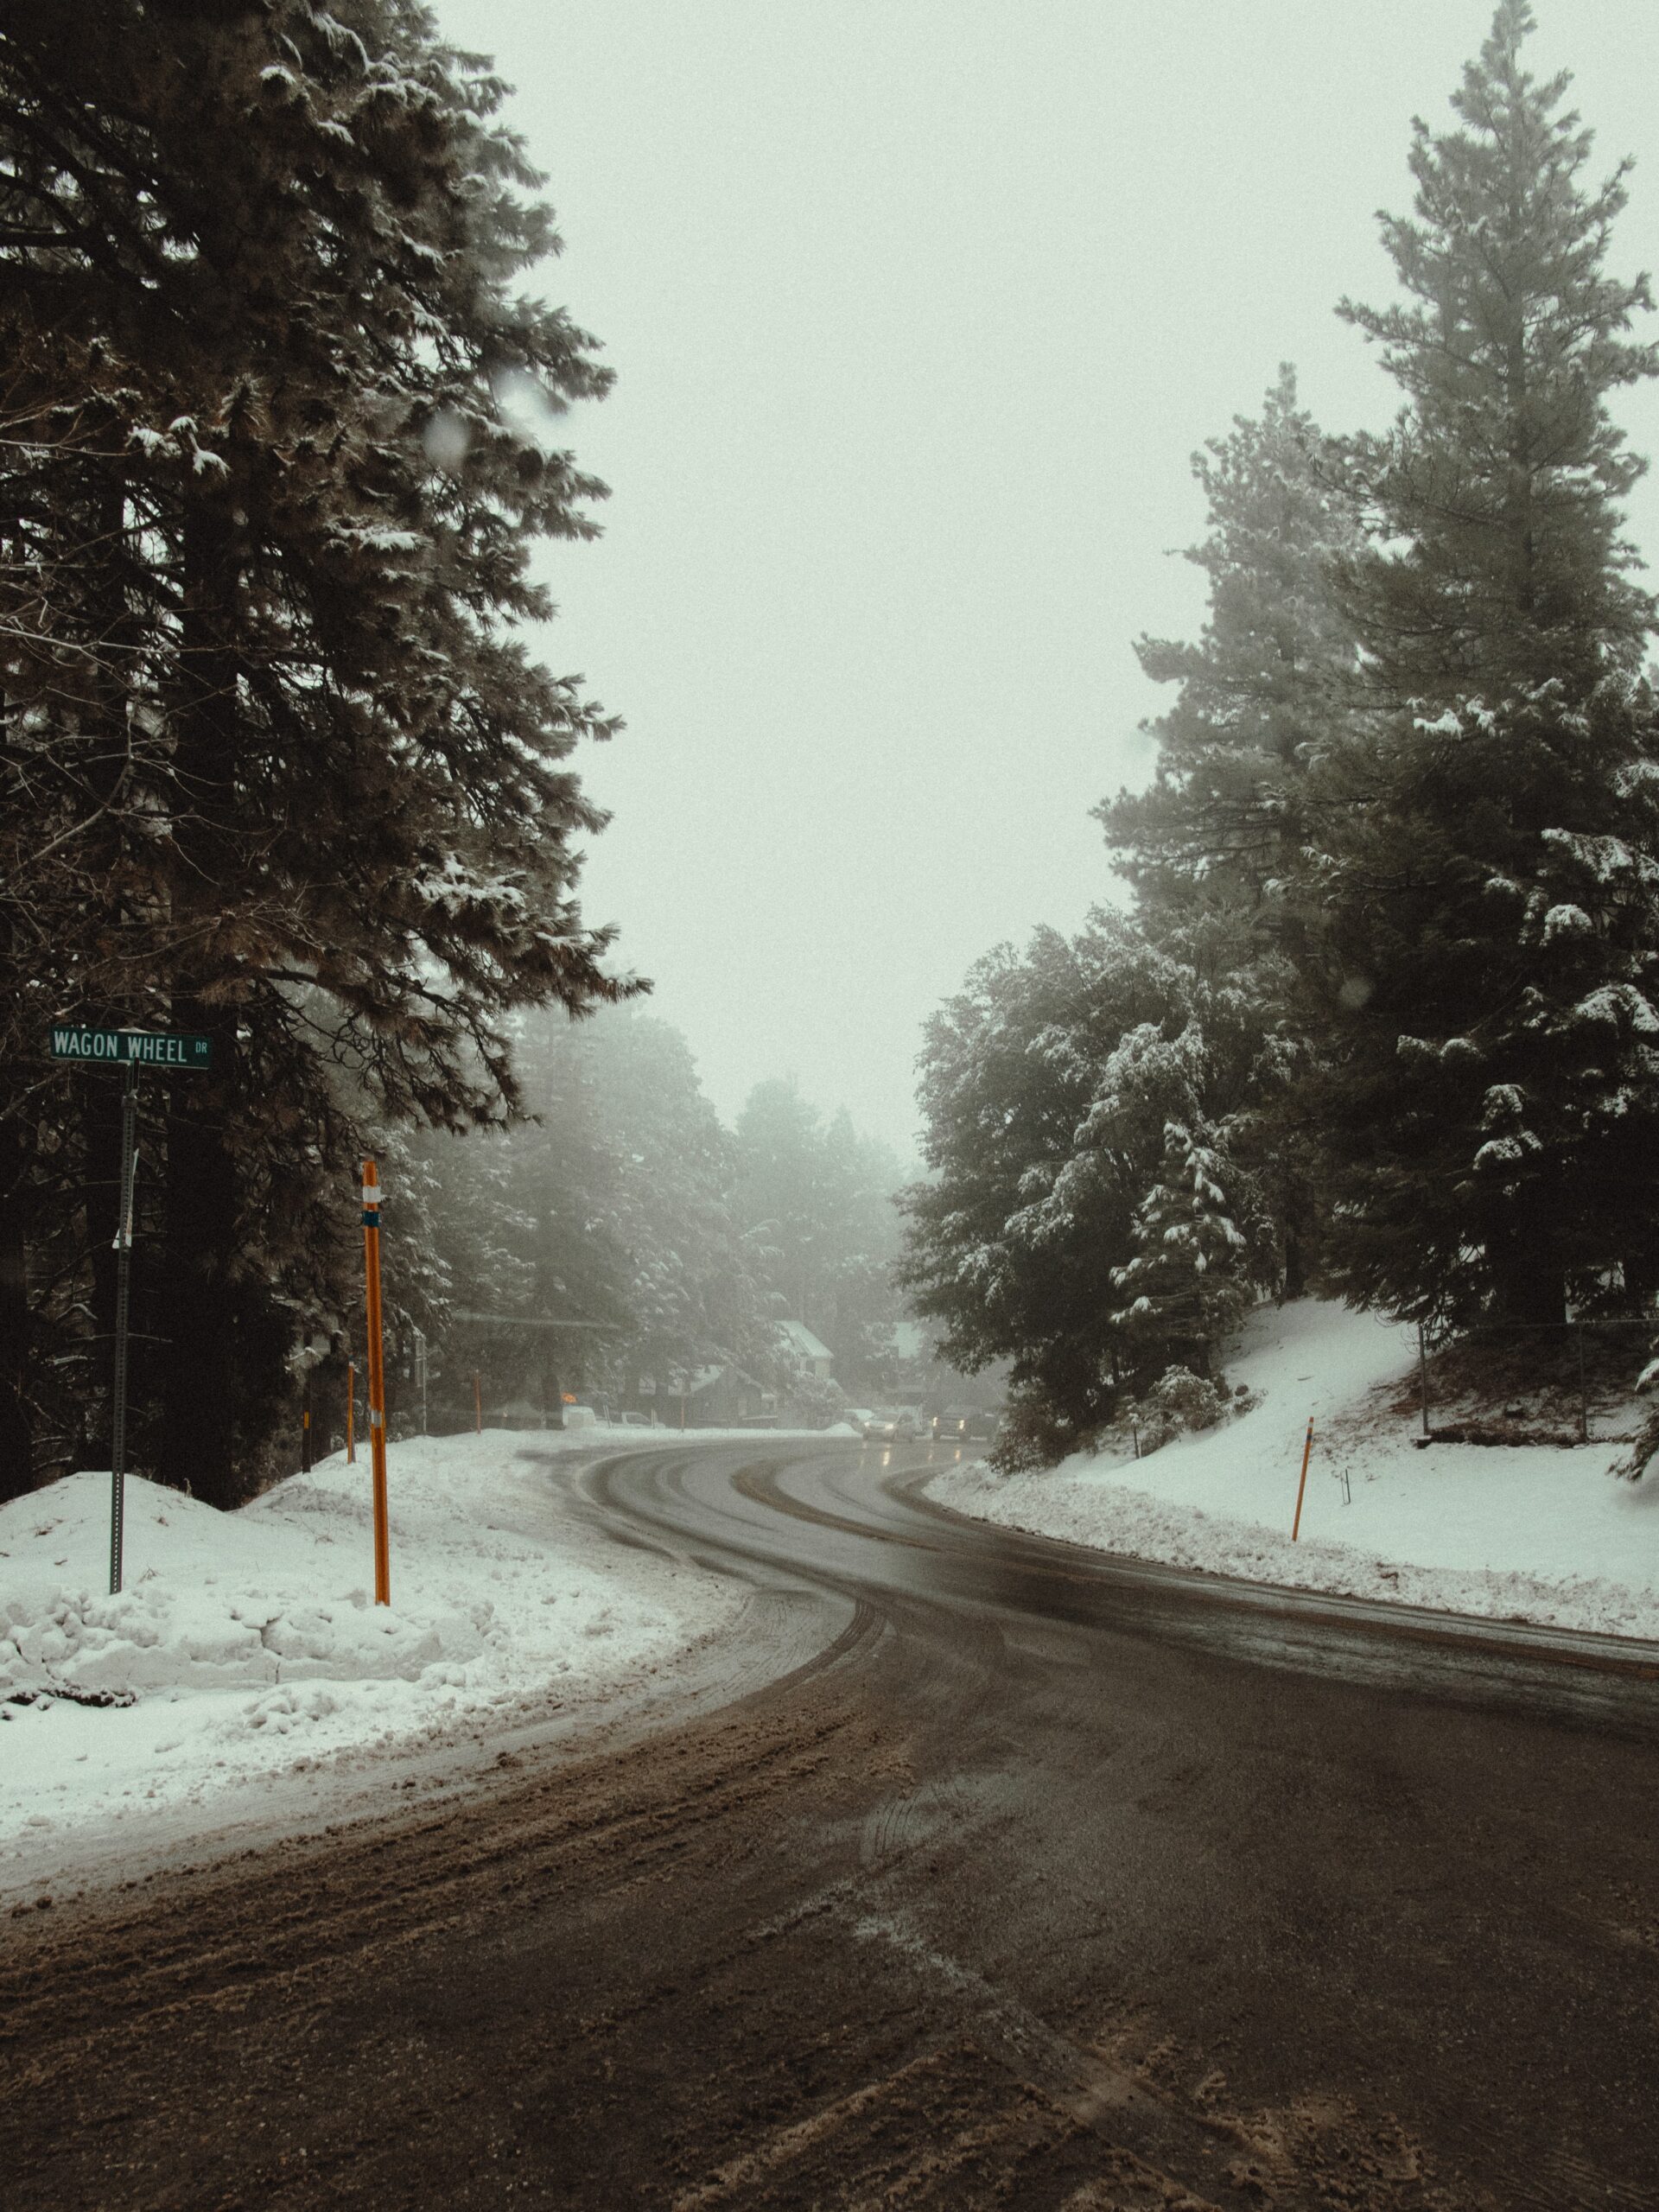 The image frames a wet road that is curving to go behind a forest of trees. There is thick green trees on either side of the road that is covered in snow.